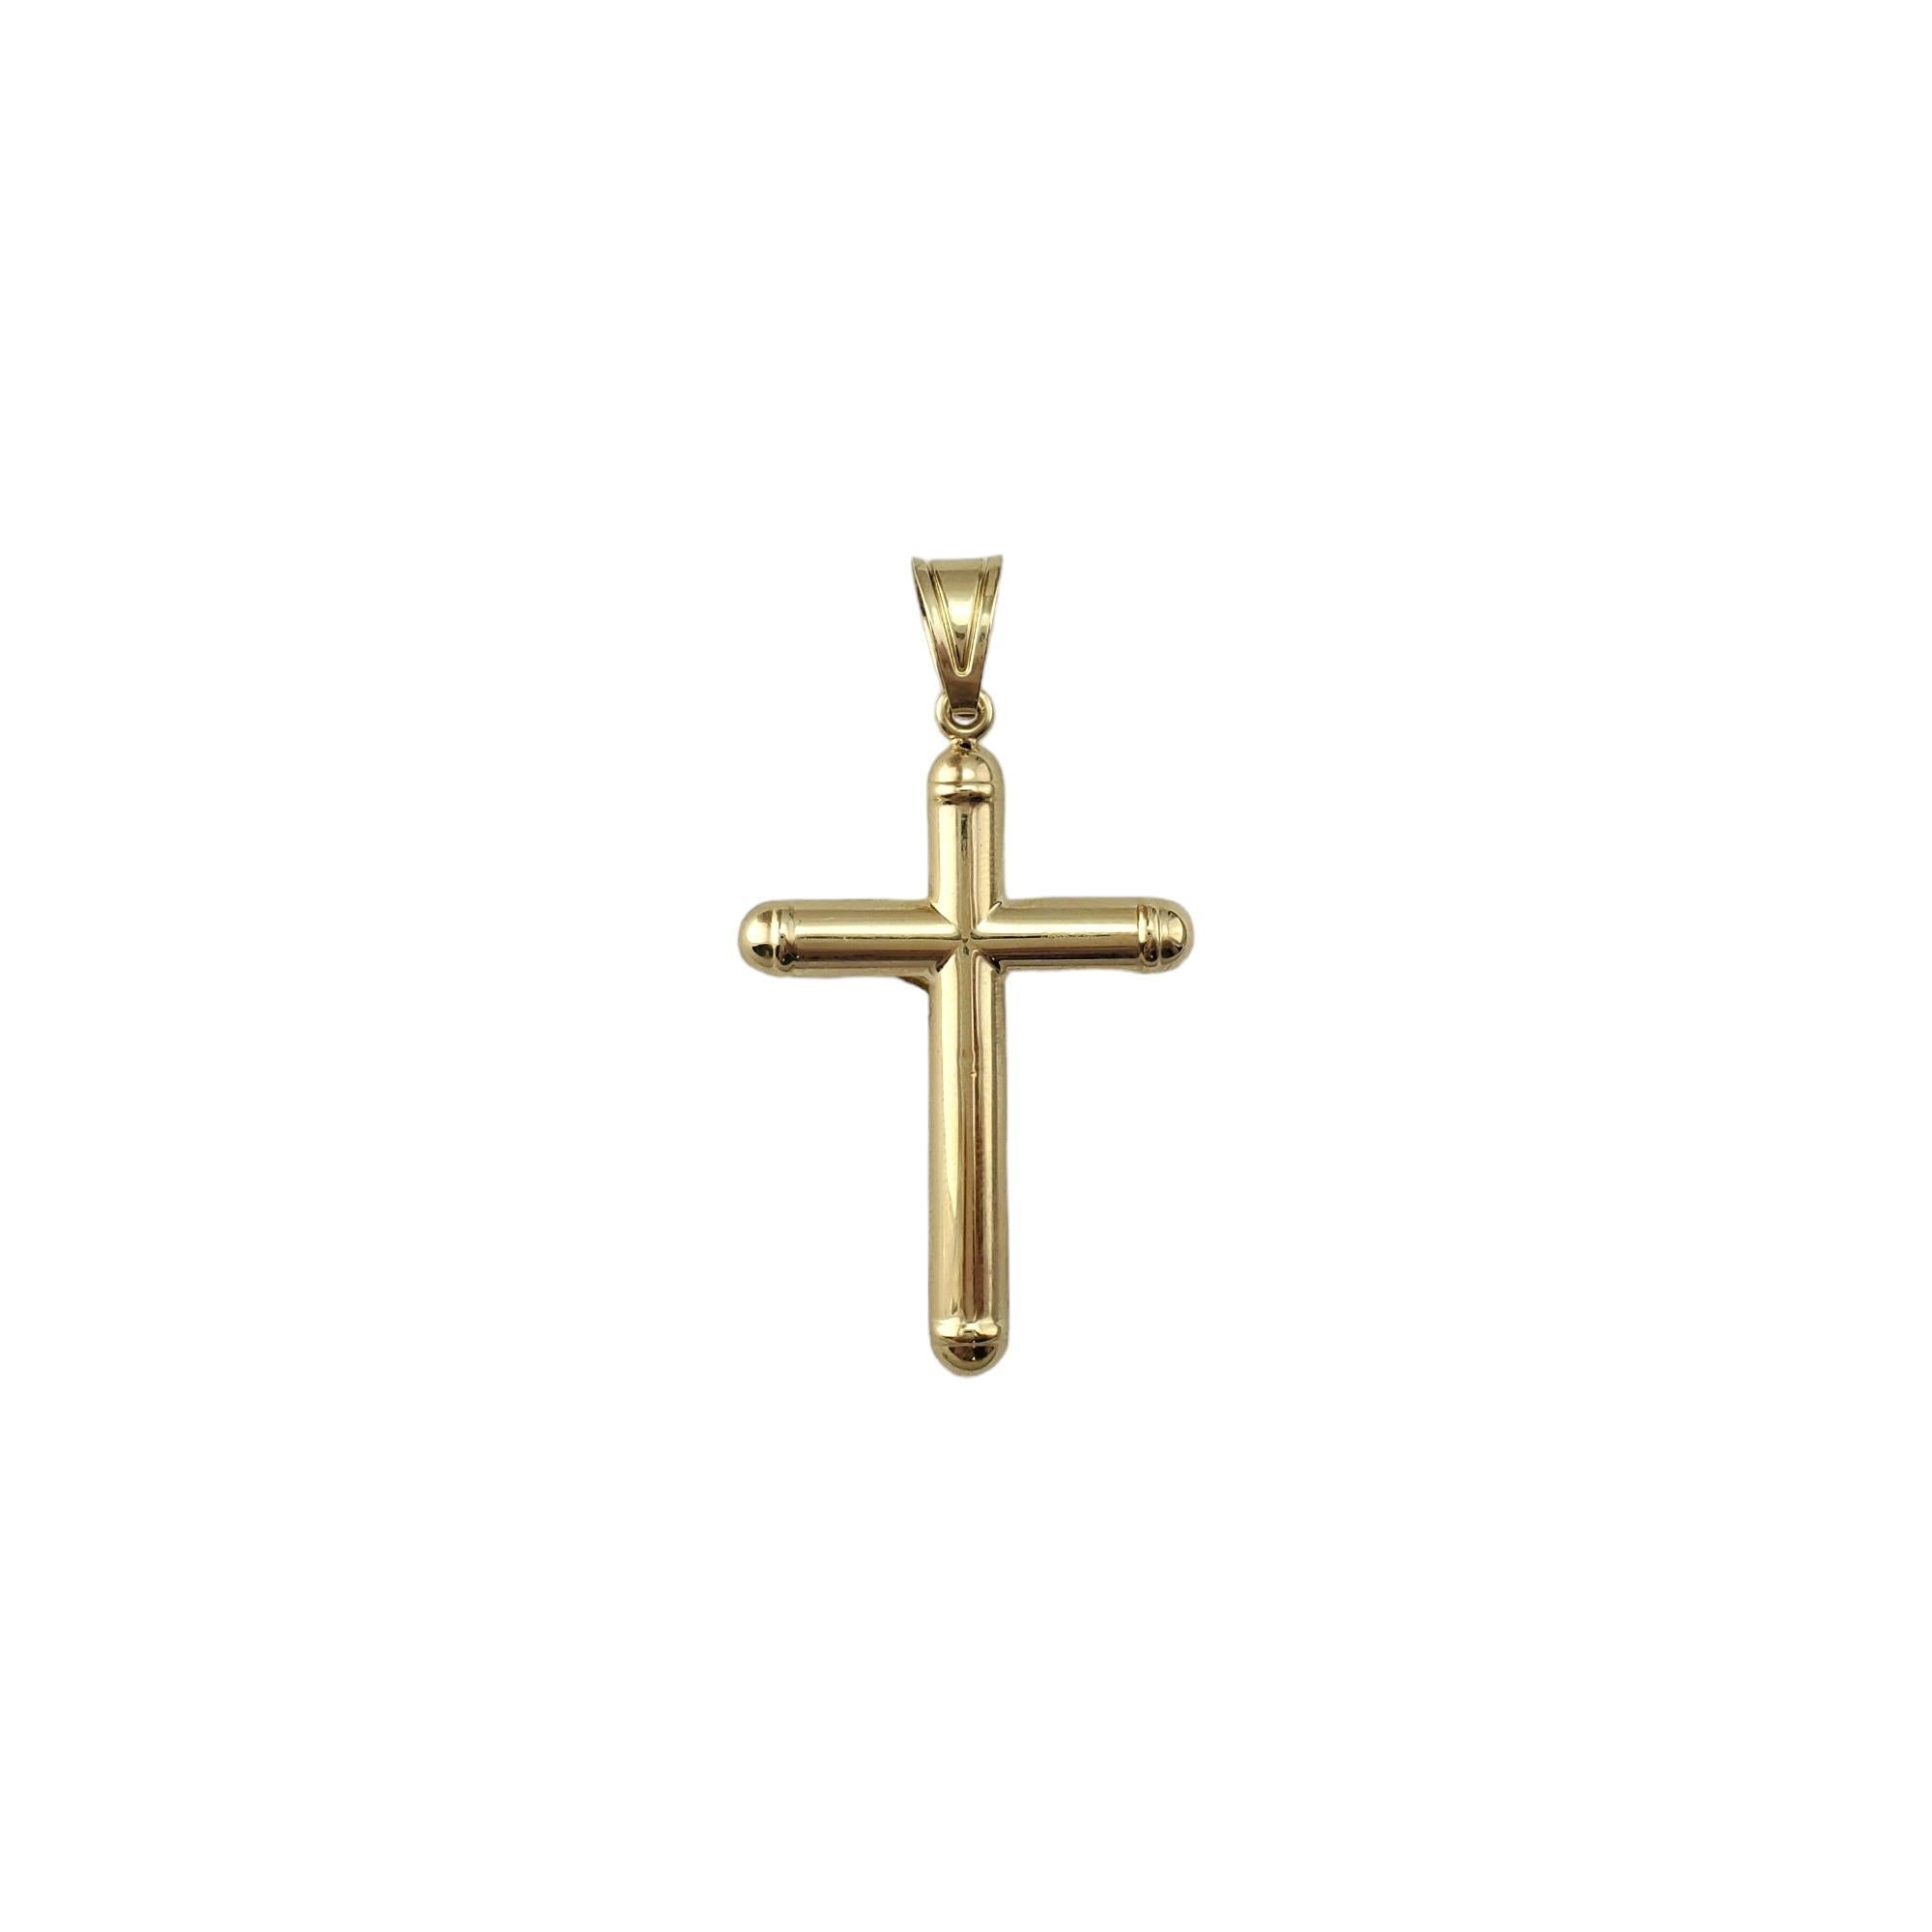 10K Two-Tone Large Yellow and White Crucifix Pendant

Large crucifix pendant with two-tone 10K yellow and white gold.

Hallmark: 10K

Weight: 2.07 dwt/3.21 g

Length w/ bail: 57.11 mm

Size: 47.33 mm X 31.74 mm X 6.15 mm

Very good condition,